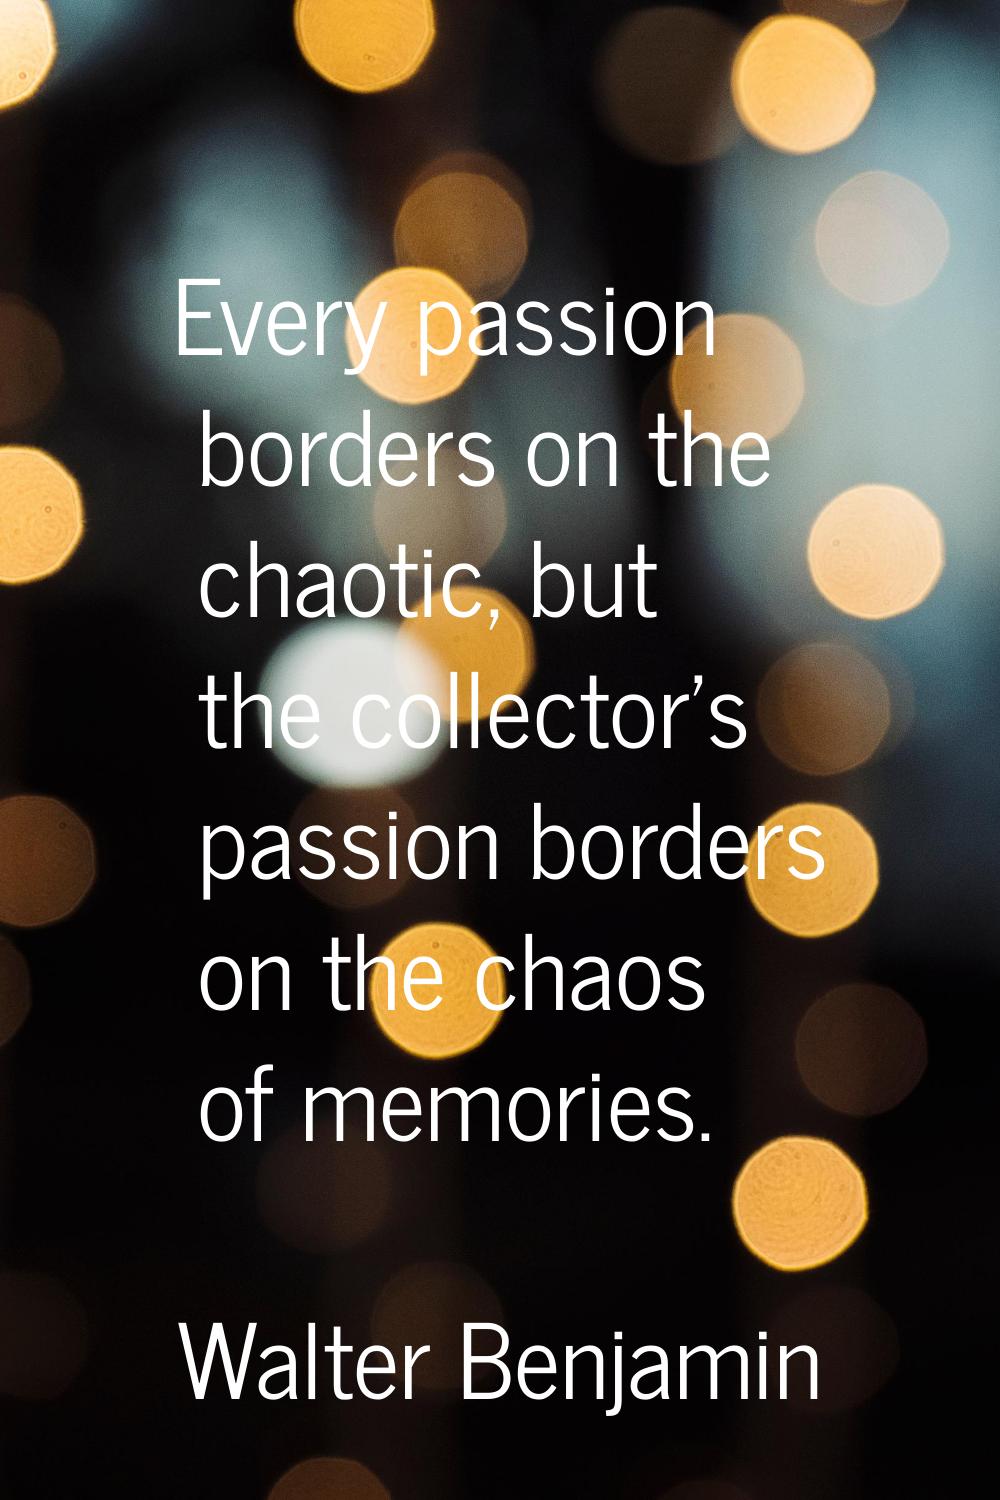 Every passion borders on the chaotic, but the collector's passion borders on the chaos of memories.